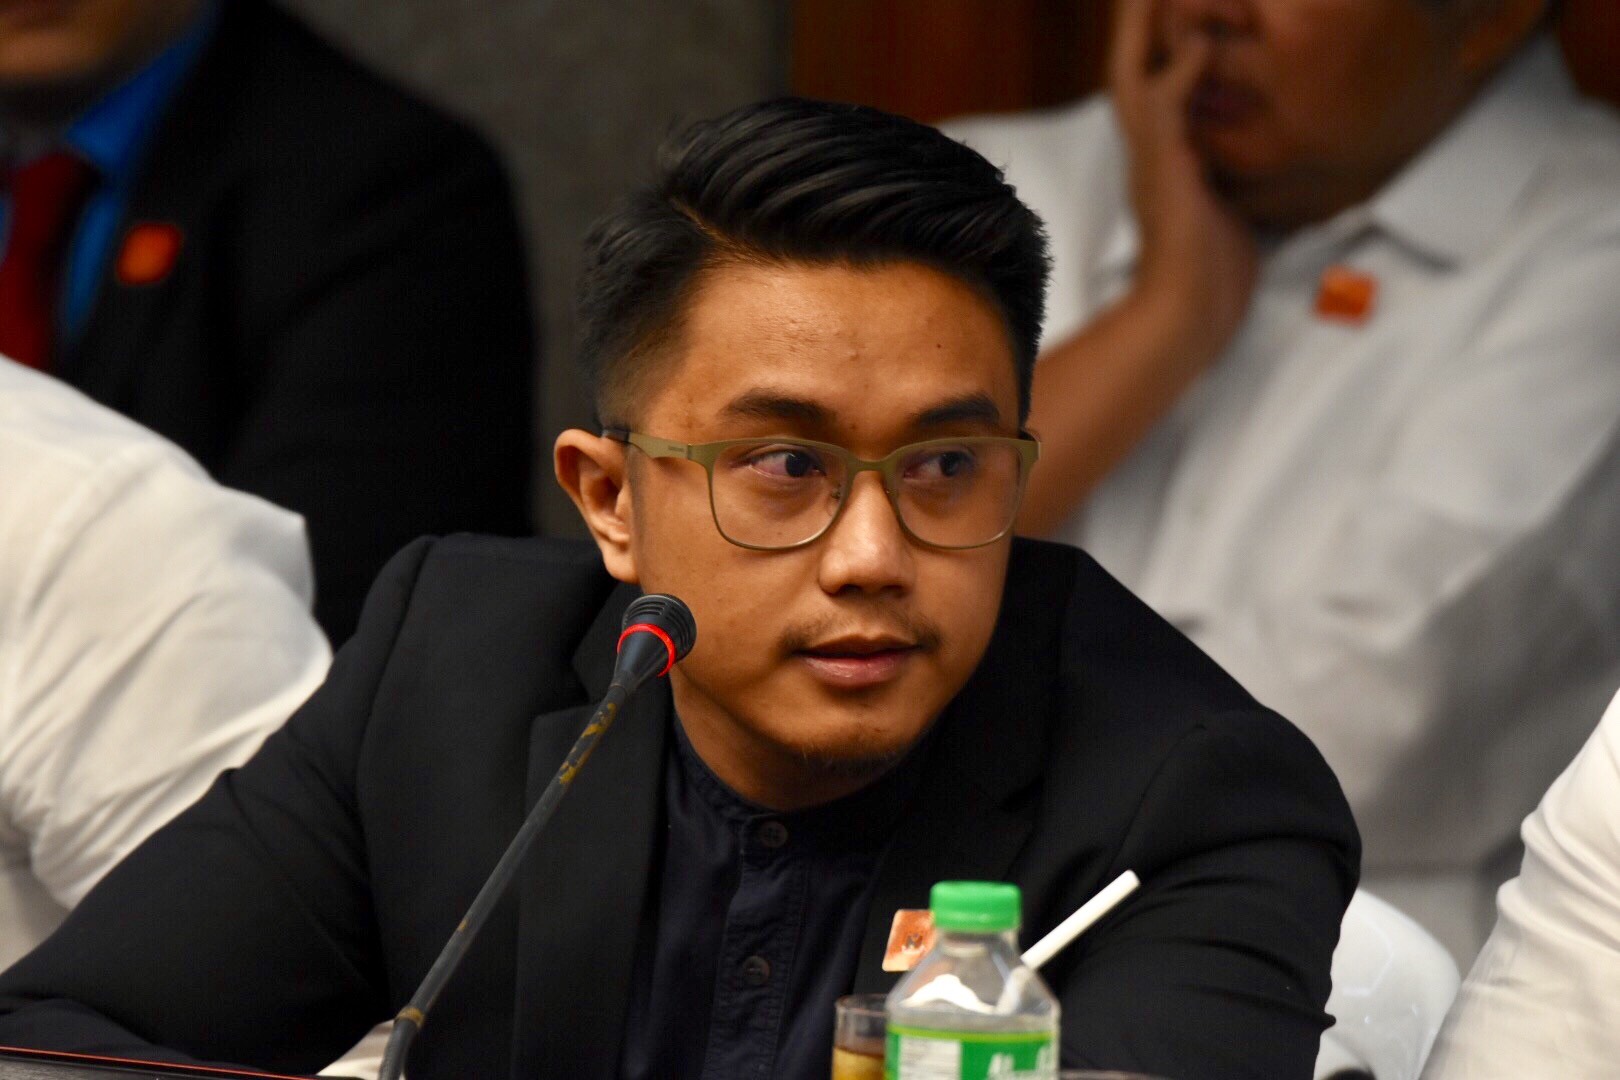 GRAND PRAEFECTUS. Arvin Balag is the leader of Aegis Juris fratenity and is named by two of his fraternity brothers John Paul Solano and Mark Anthony Ventura. Photo by Angie de Silva/Rappler  